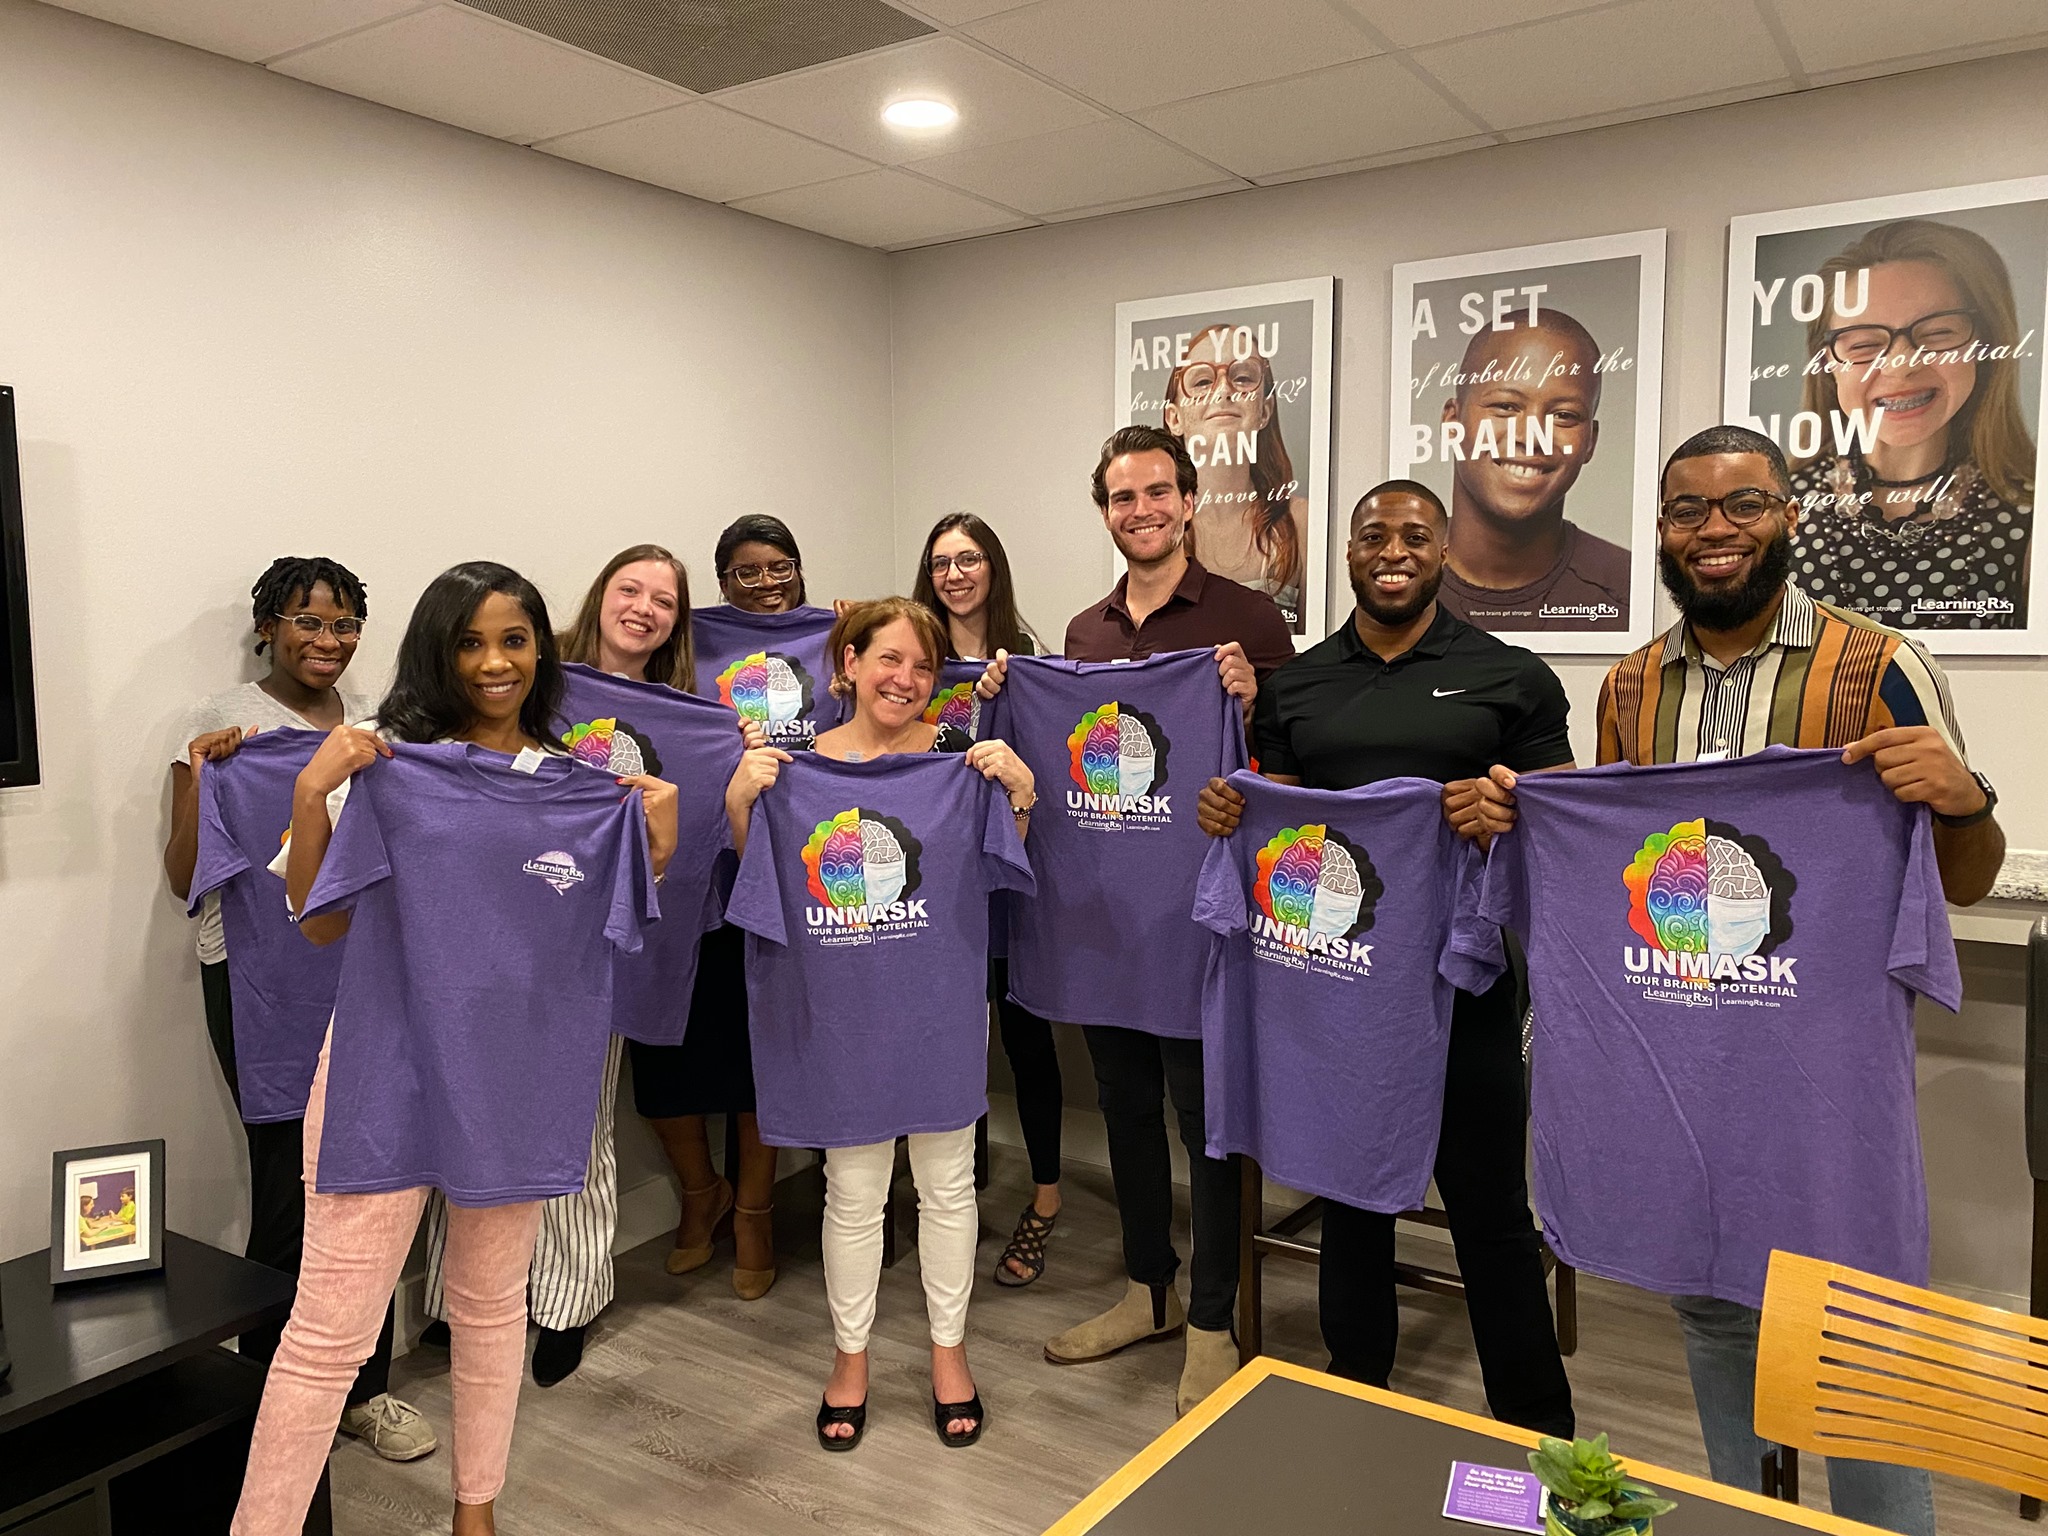 Susie and her staff with Brain Trainer shirts